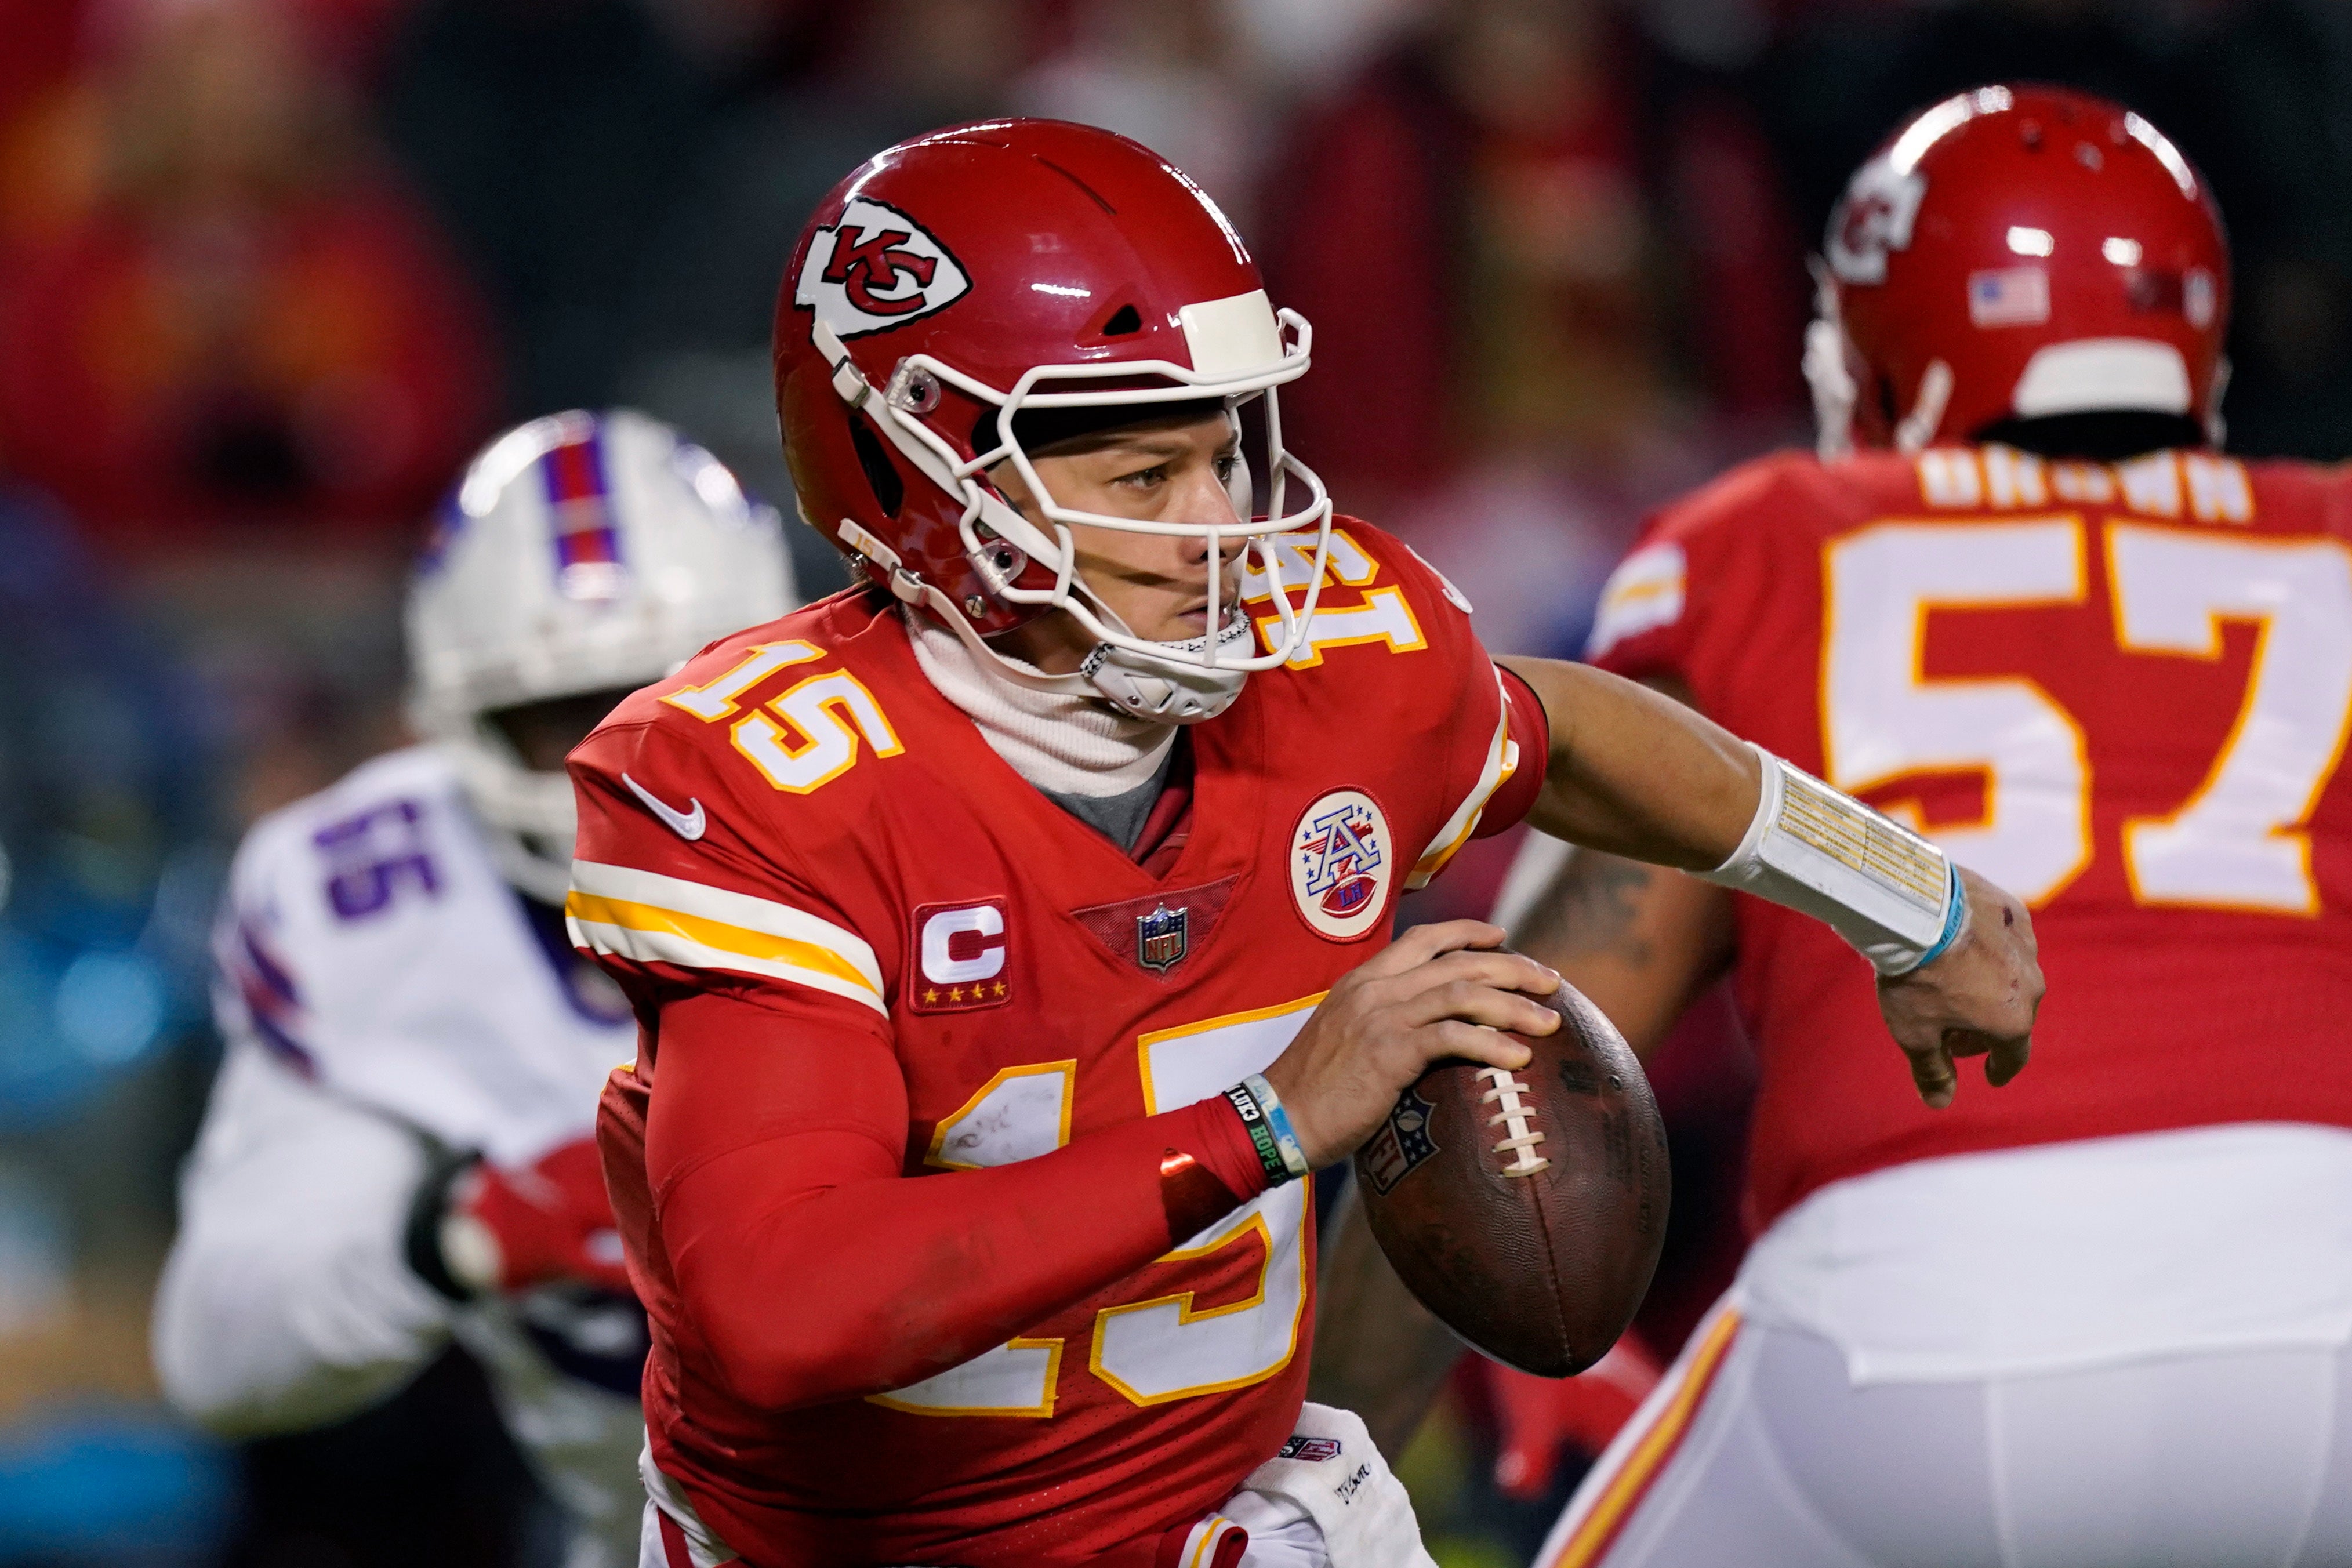 Patrick Mahomes led the Kansas City Chiefs to a fourth straight AFC Championship game with a 42-36 overtime win against the Buffalo Bills (AP Photo/Charlie Riedel)